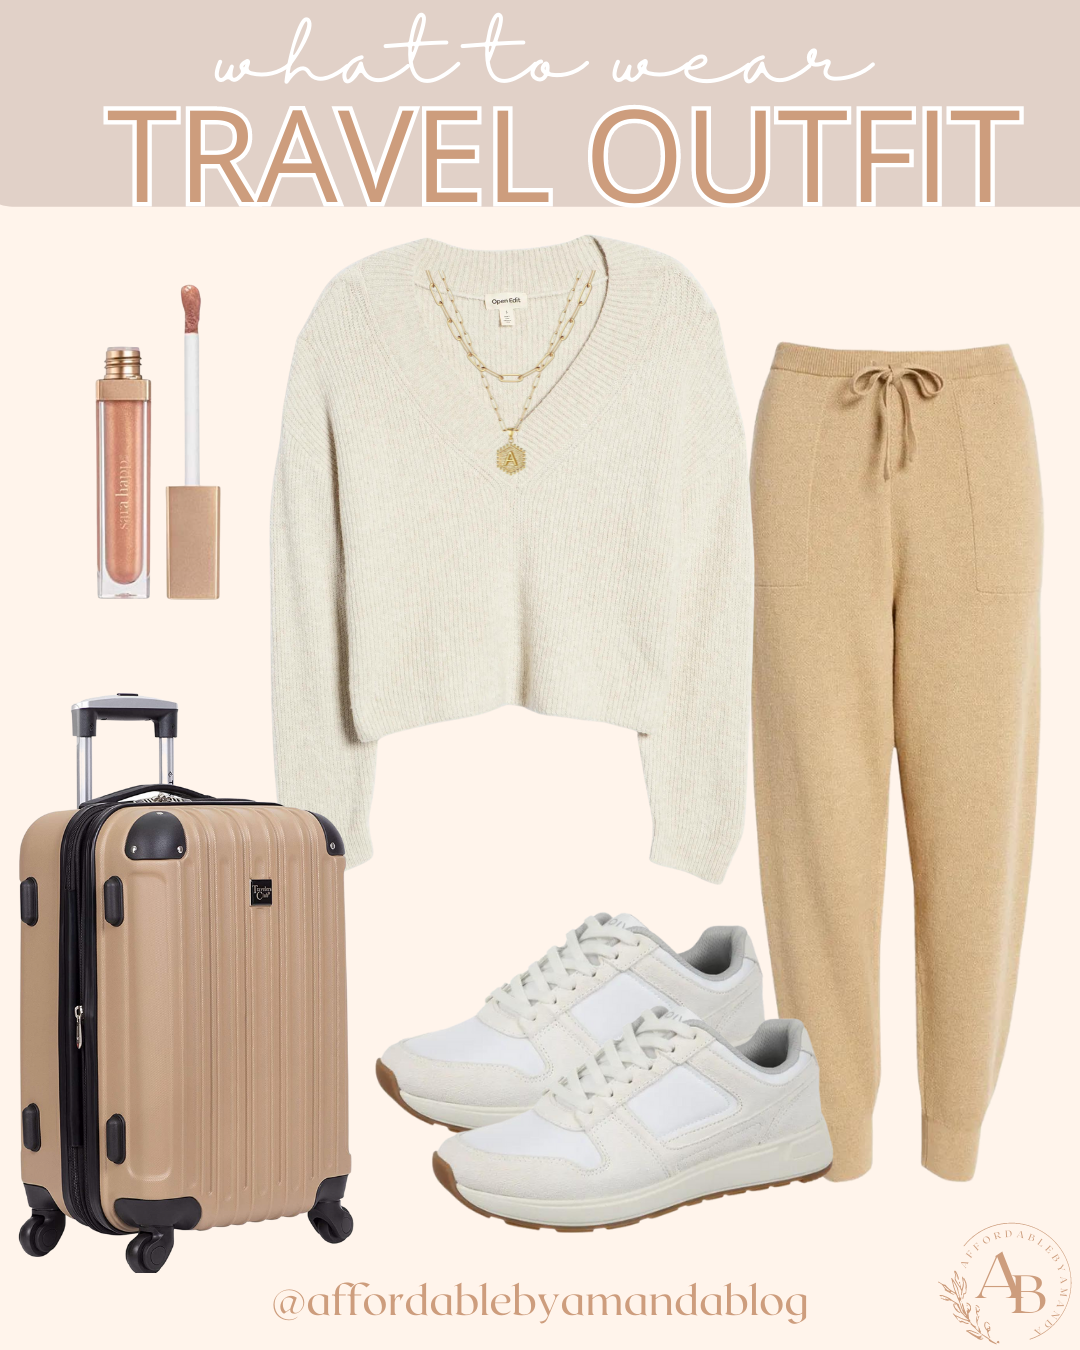 Travel Outfit Idea - Rib Stitch Sweater with Sweater Joggers and White Sneakers for a Plane Ride - Affordable by Amanda